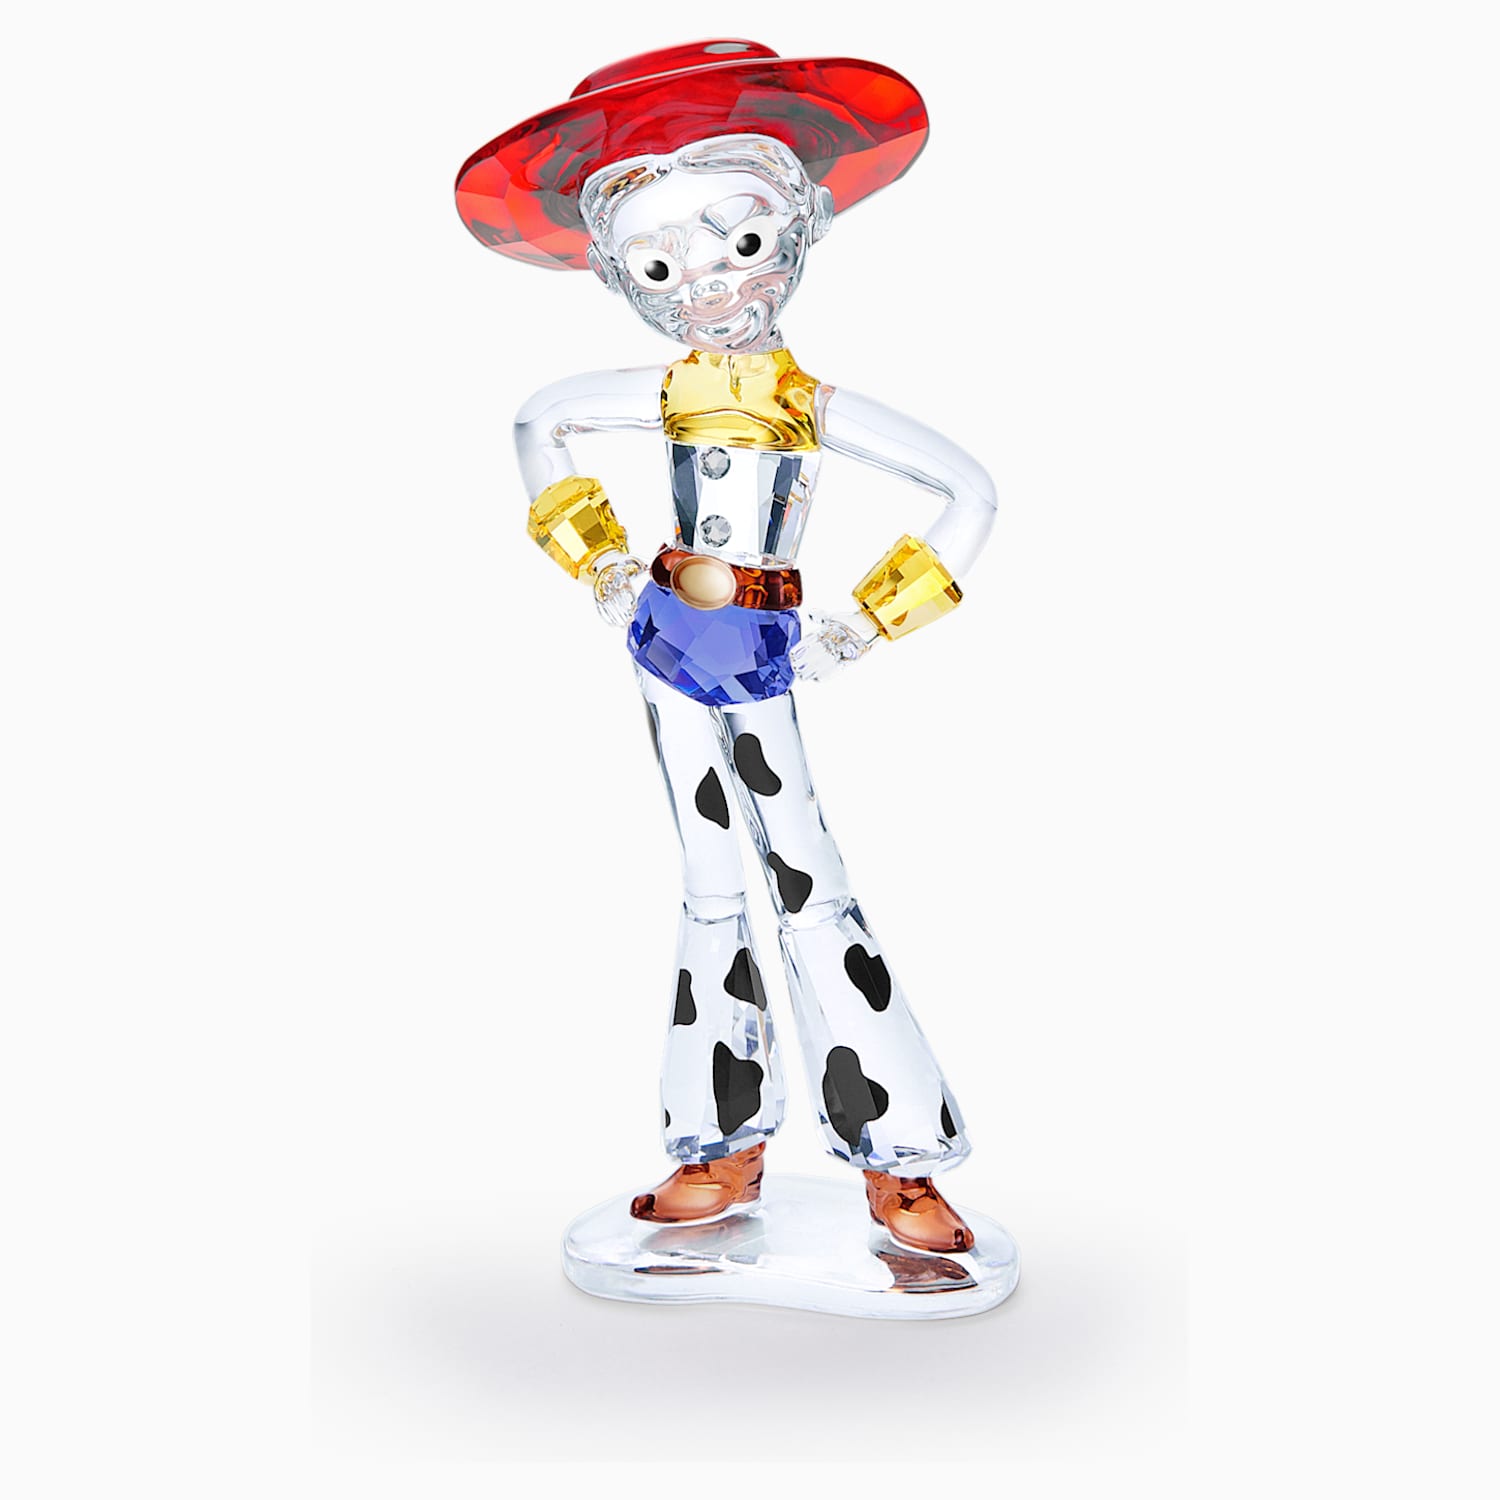 toy story jessie collection